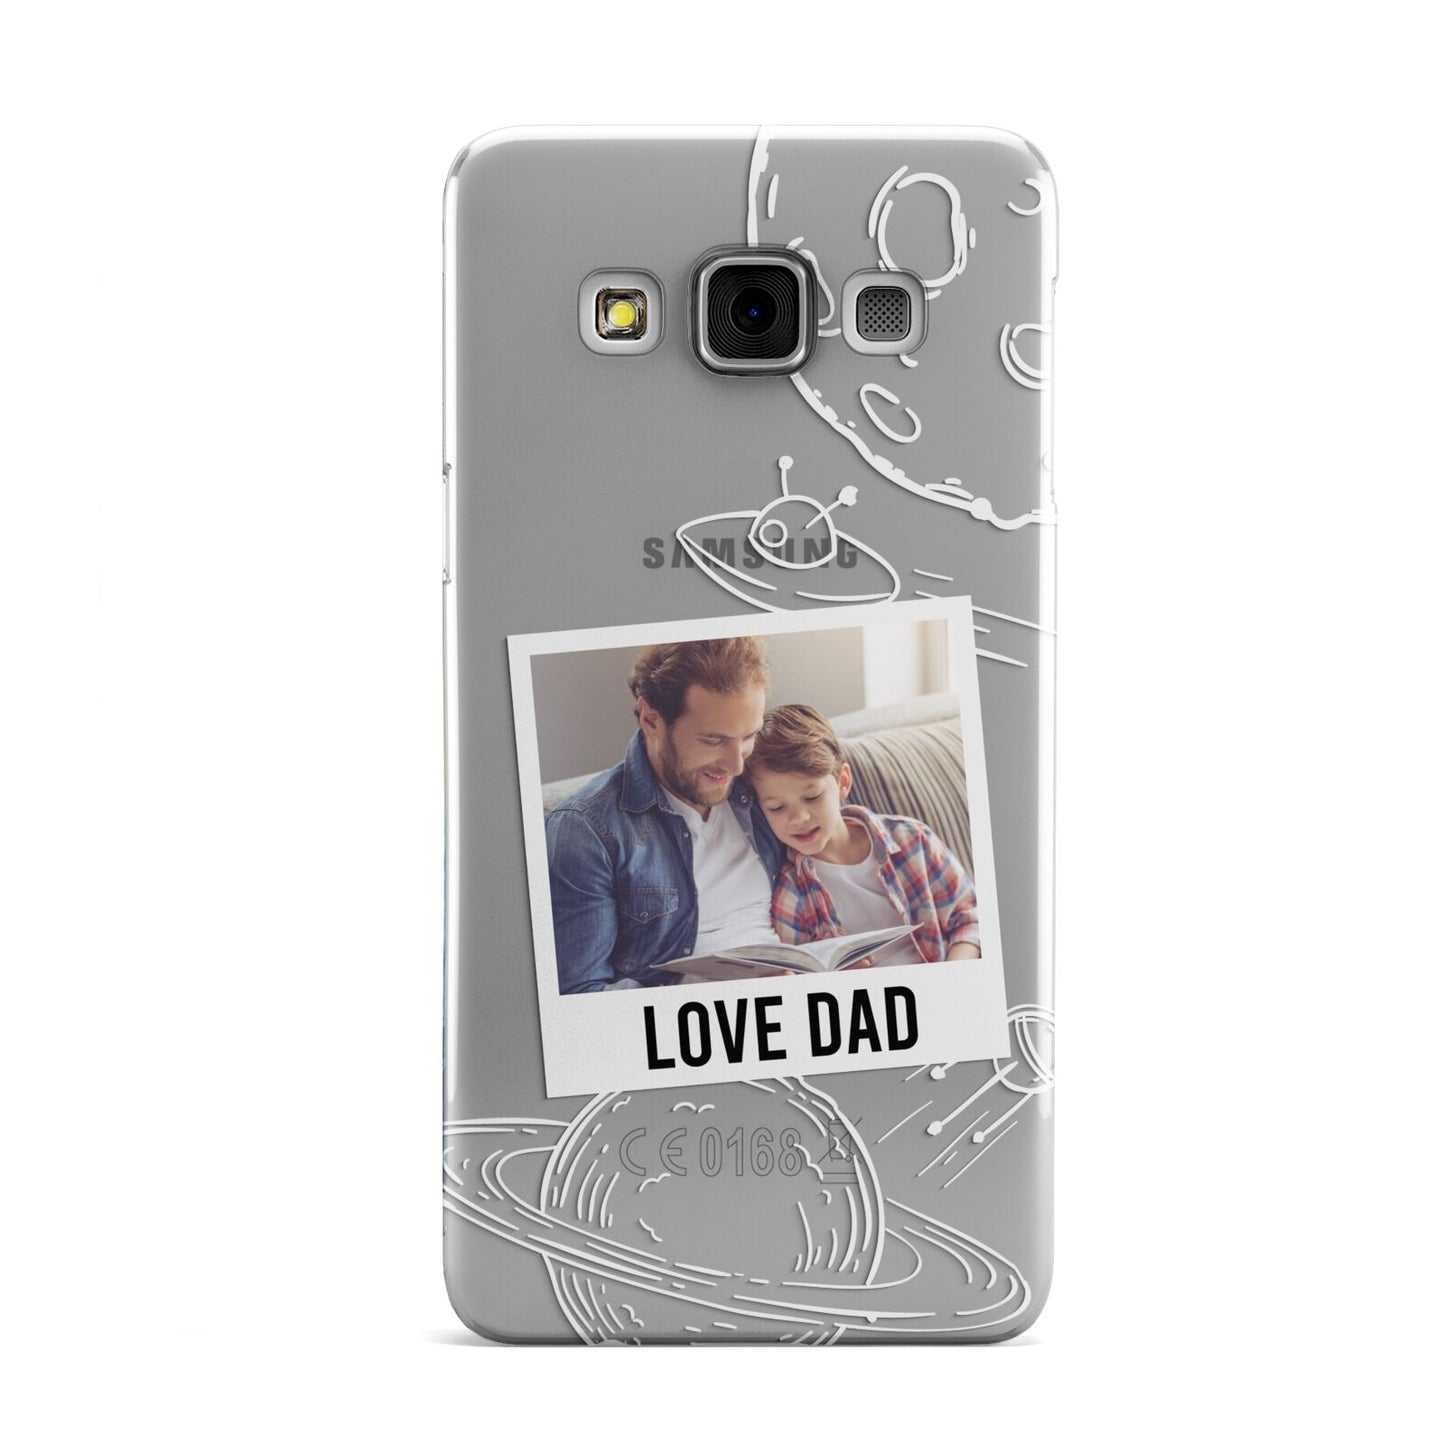 Personalised From Dad Photo Samsung Galaxy A3 Case